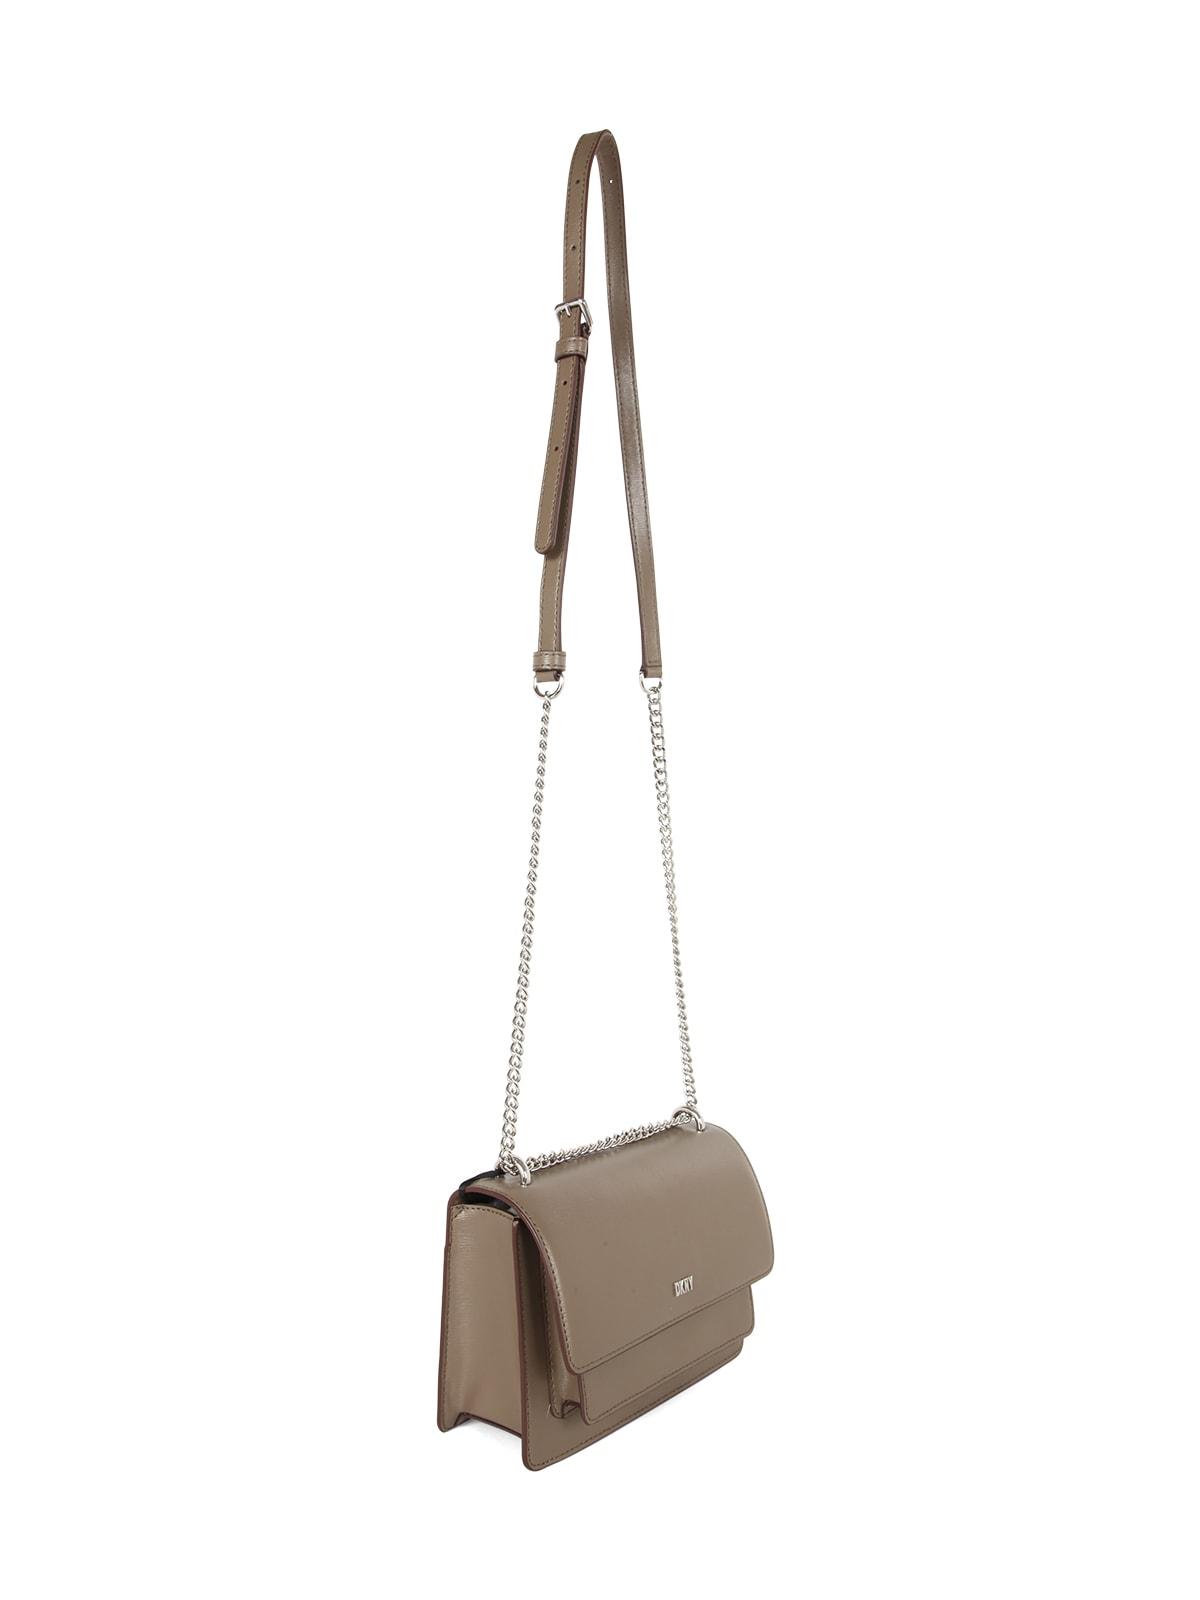 DKNY Bryant Chain Flap Crossbody in Natural | Lyst